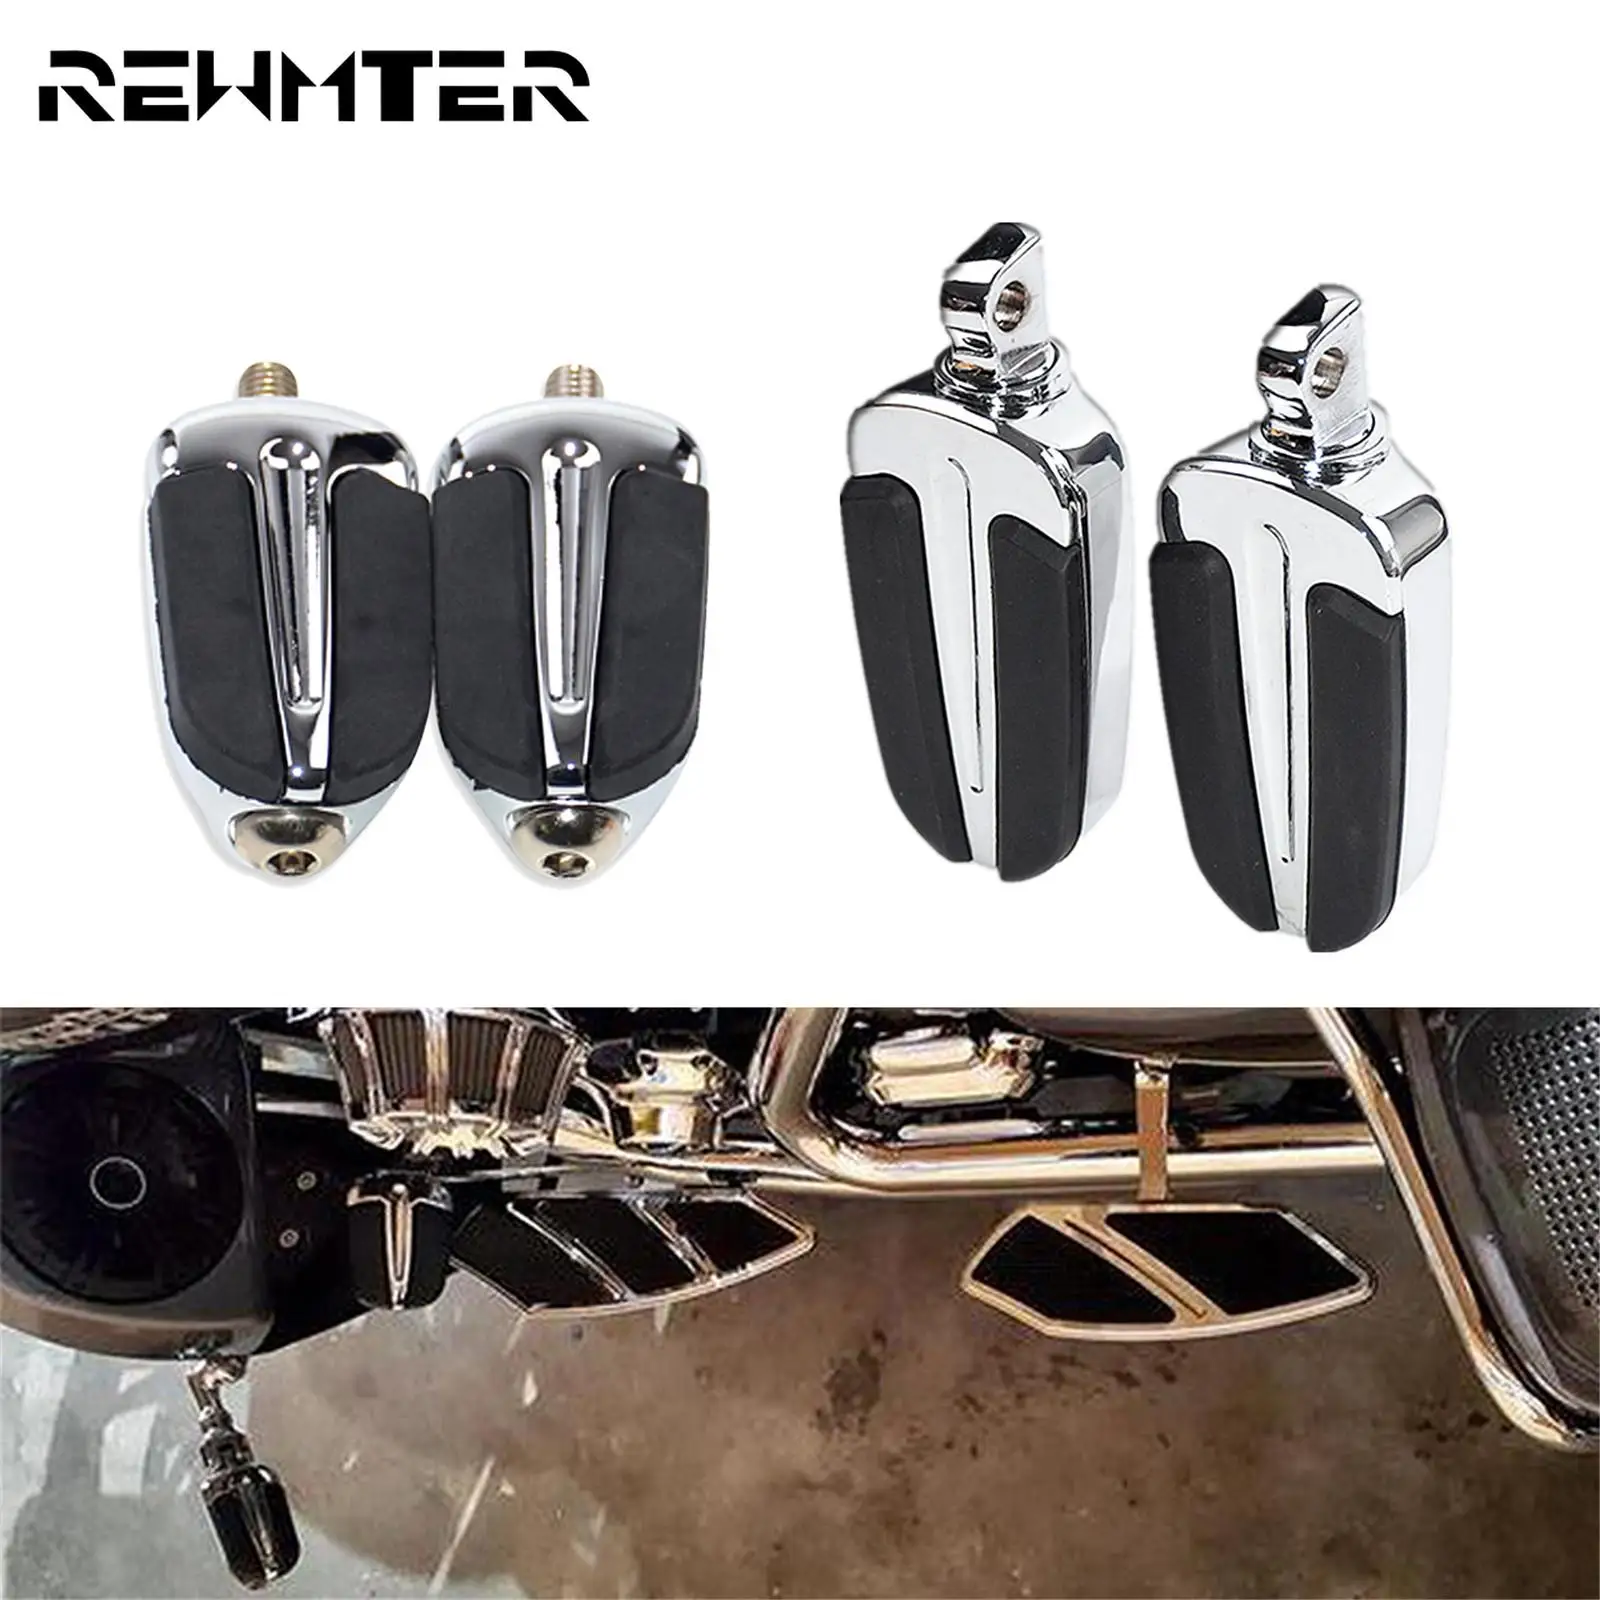 Motorcycle CNC Slipstream Footpegs Footrests Shifter Peg Pedal For Harley - $40.90+